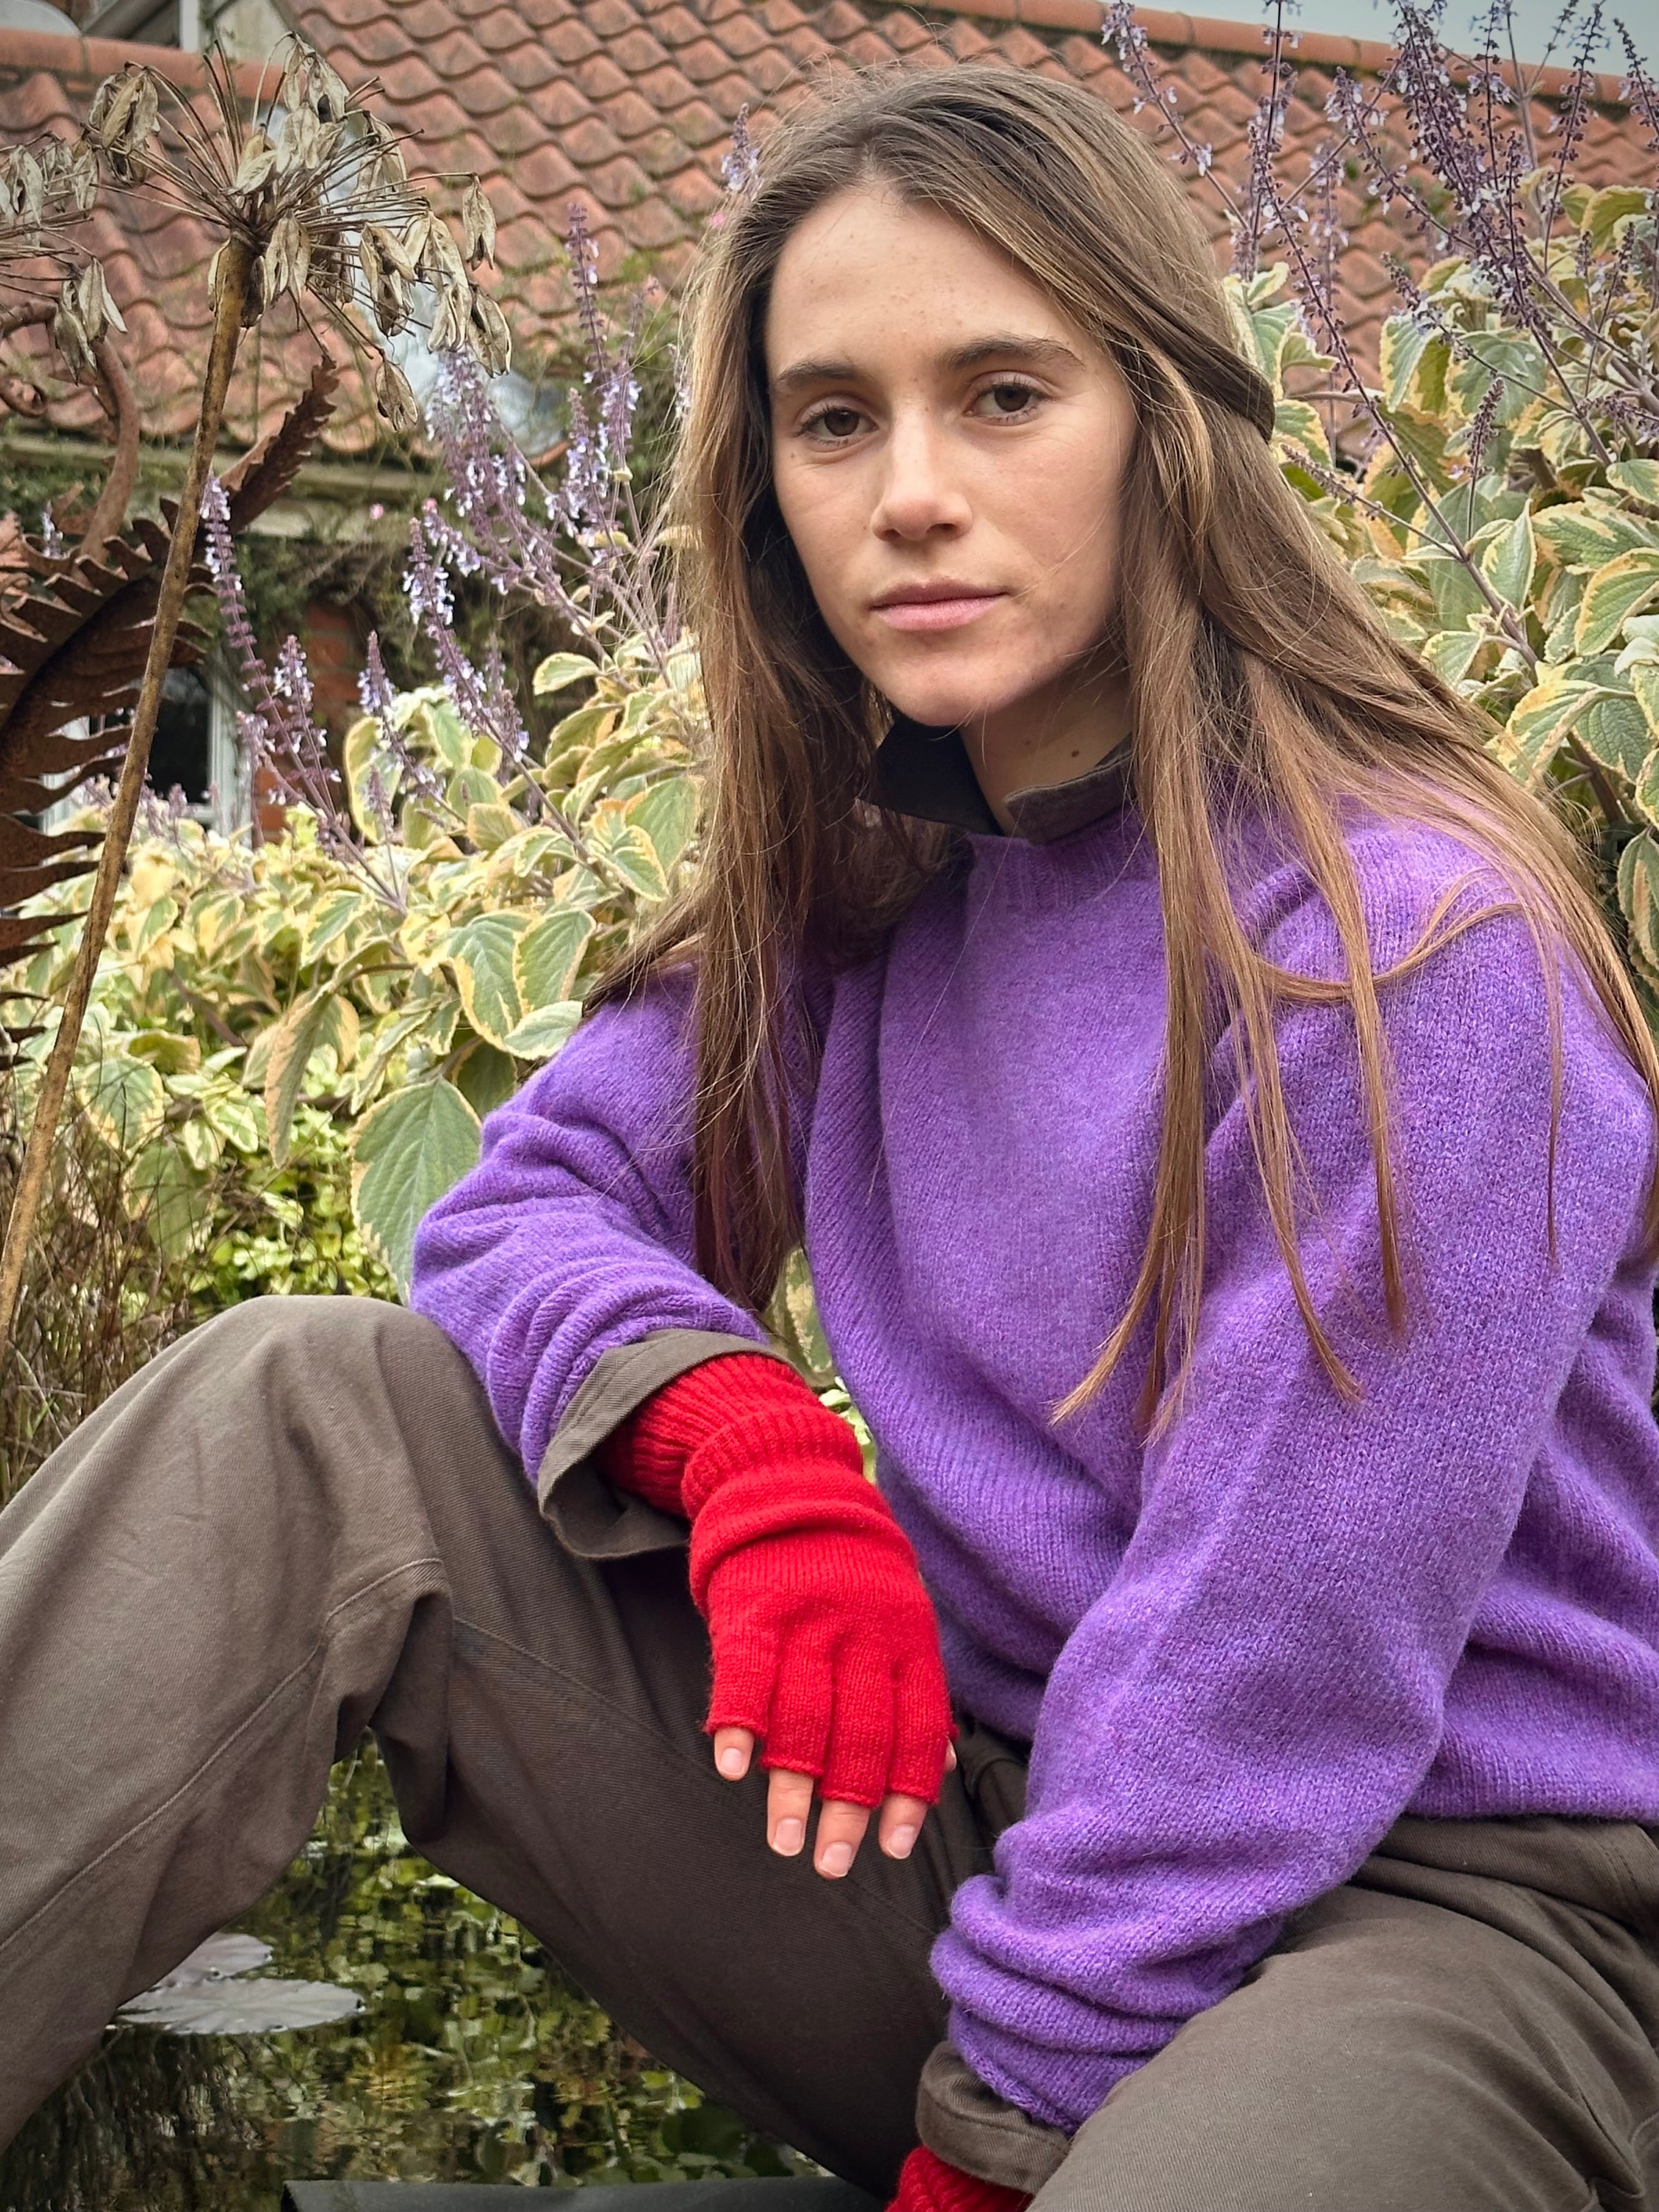 Decca wears Carrier Company Shetland Lambswool Jumper in Allium with Gathering Glove